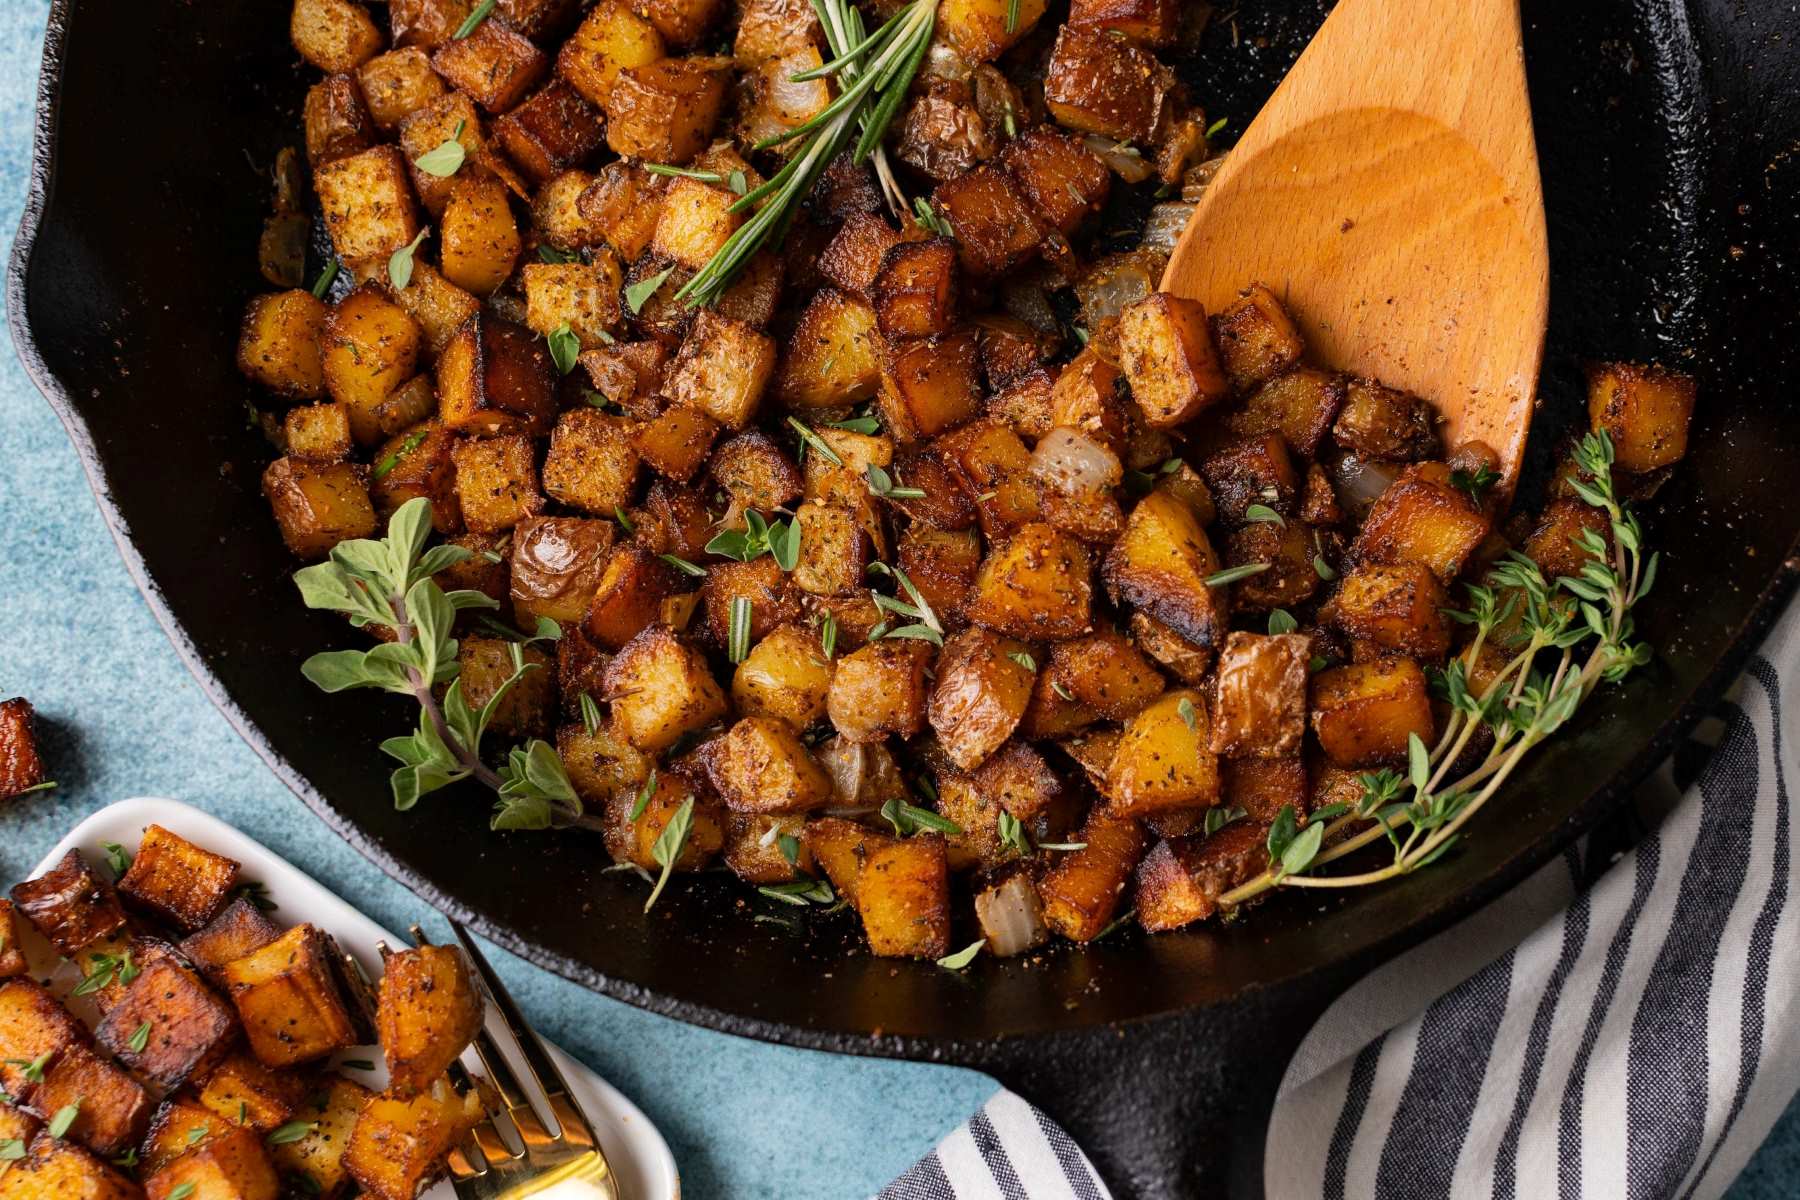 turn-your-side-dish-into-a-main-event-with-these-spiced-skillet-potatoes